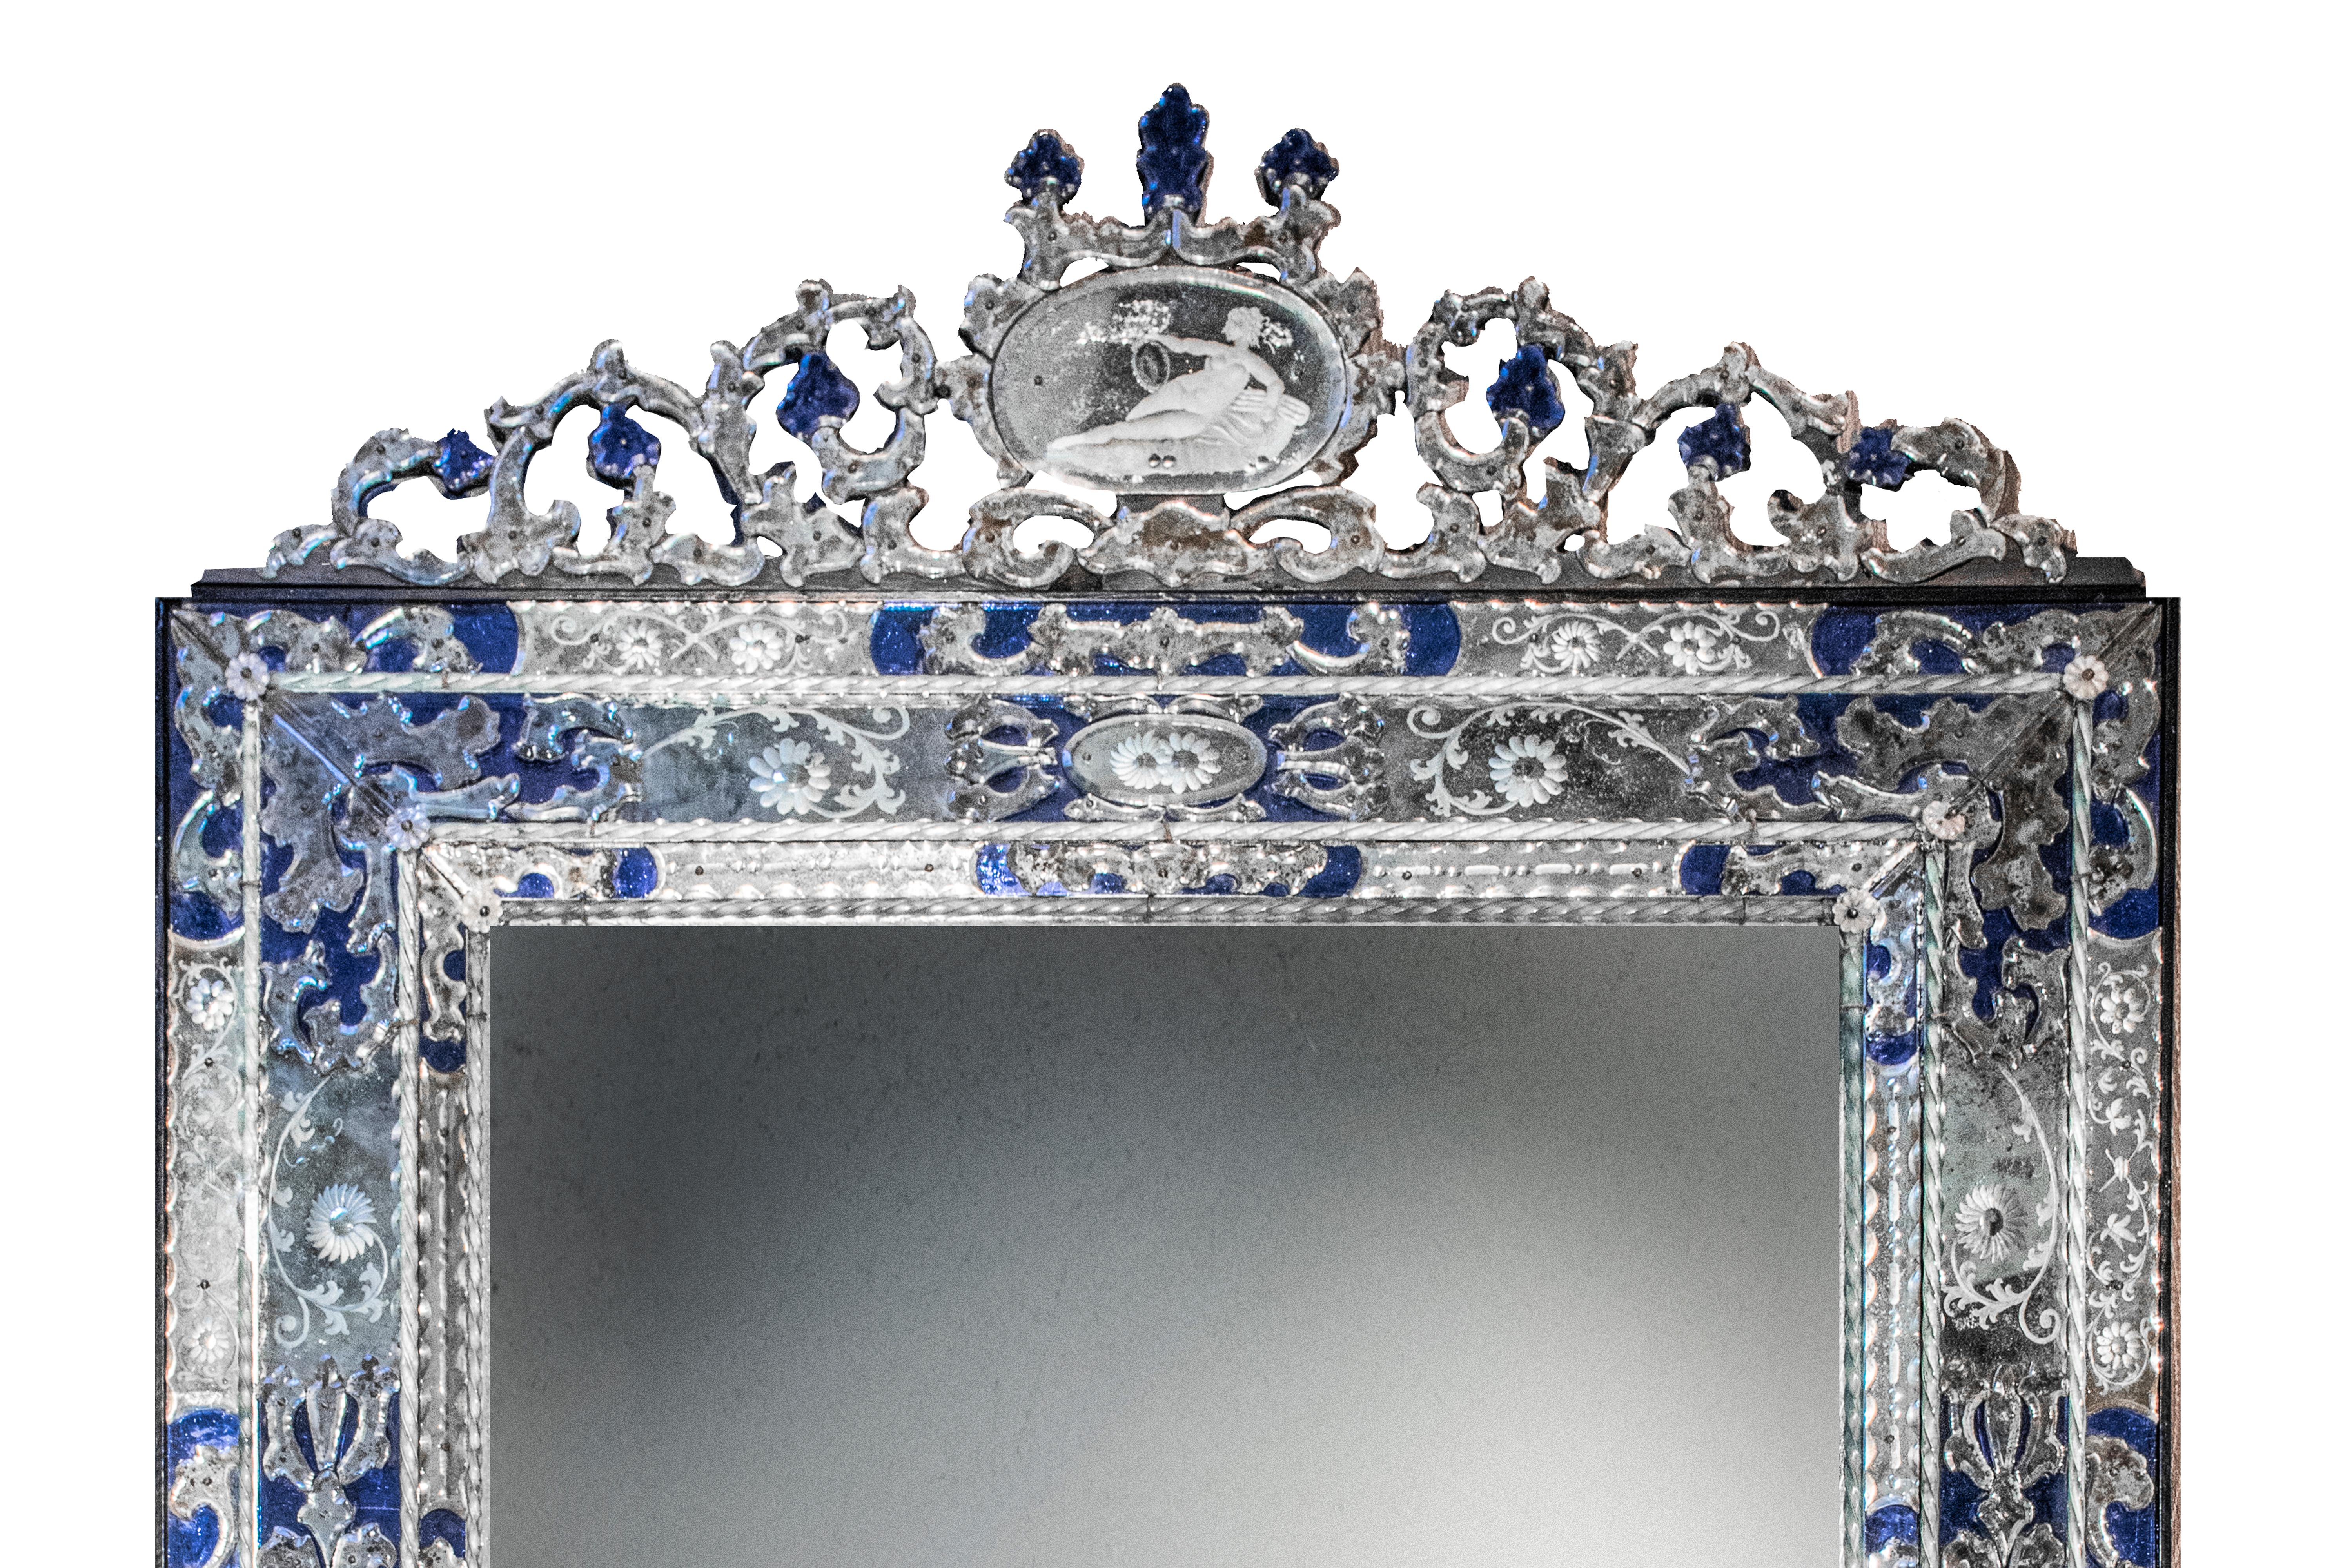 Pair of spectacular large antique Venetian mirrors. Mounted in wide rectangular frames with acid-etched floral motifs and blue-colored overlay elements, alongside twisted Murano glass beadings. The top parts of the frames feature ornate designs with